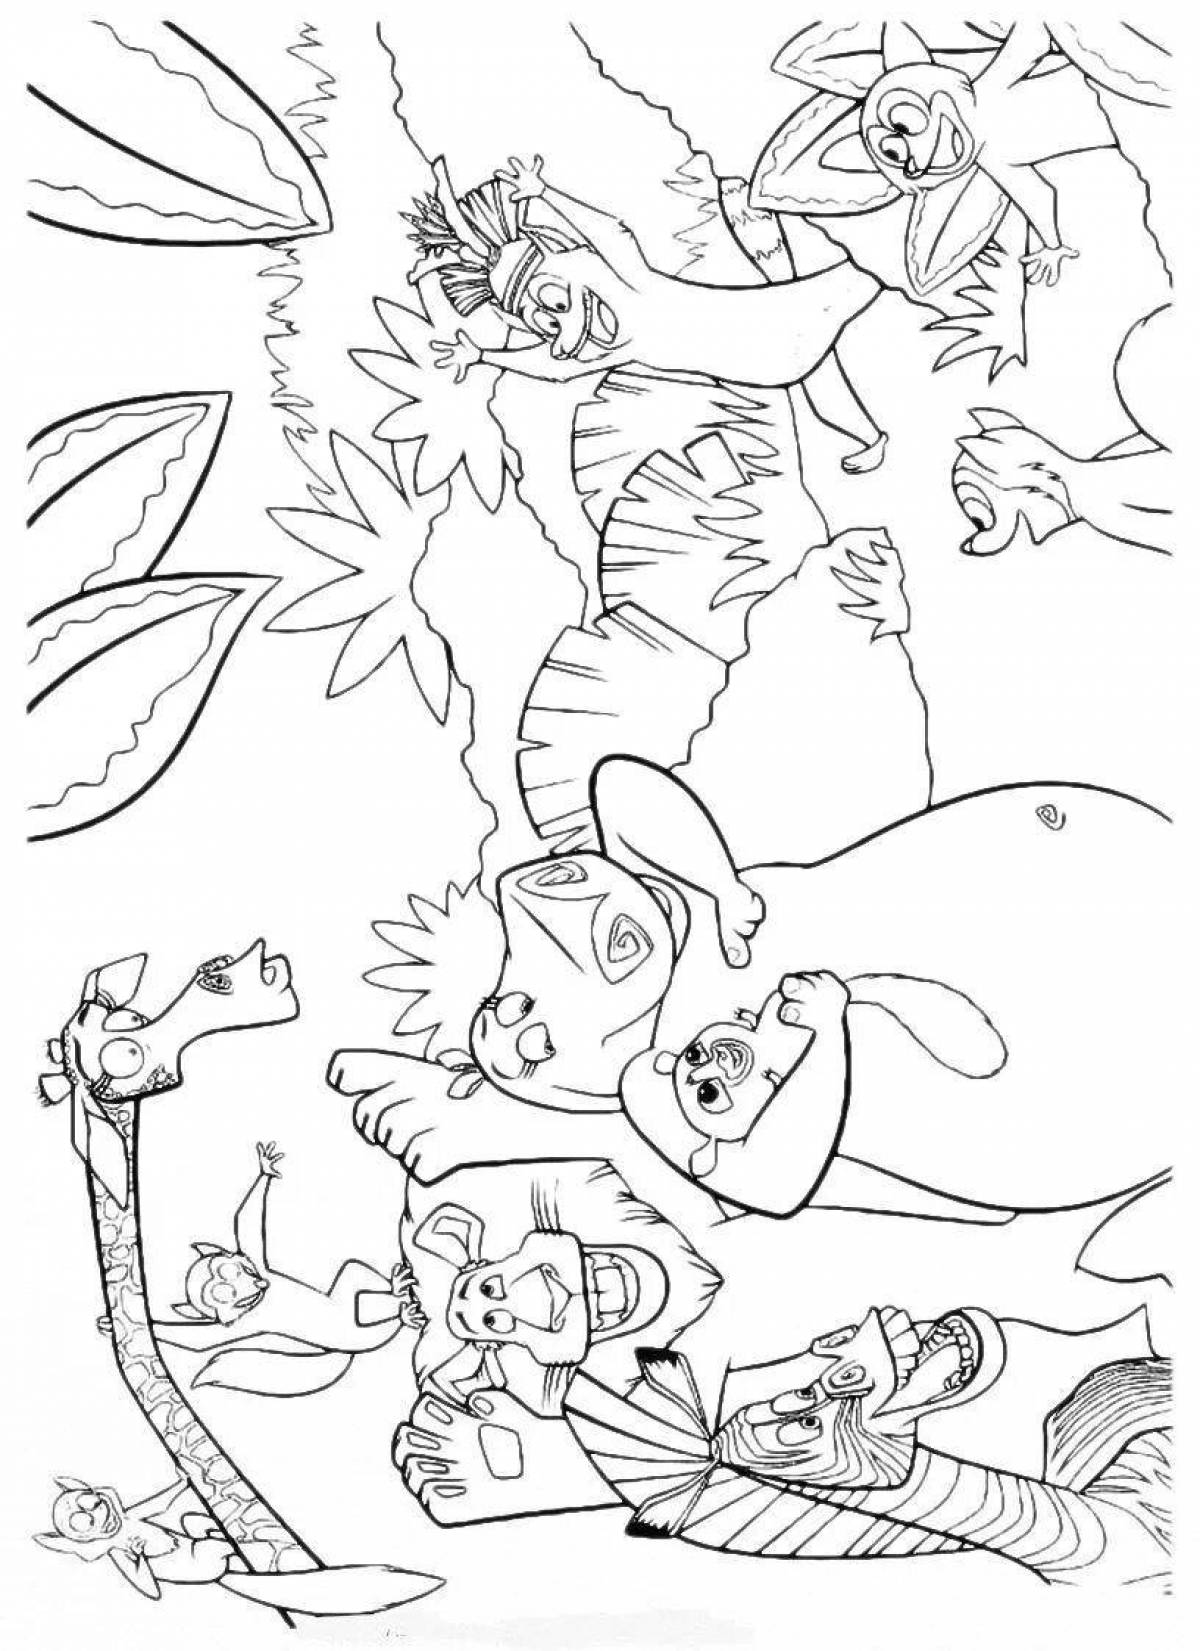 Fairy king julian coloring page